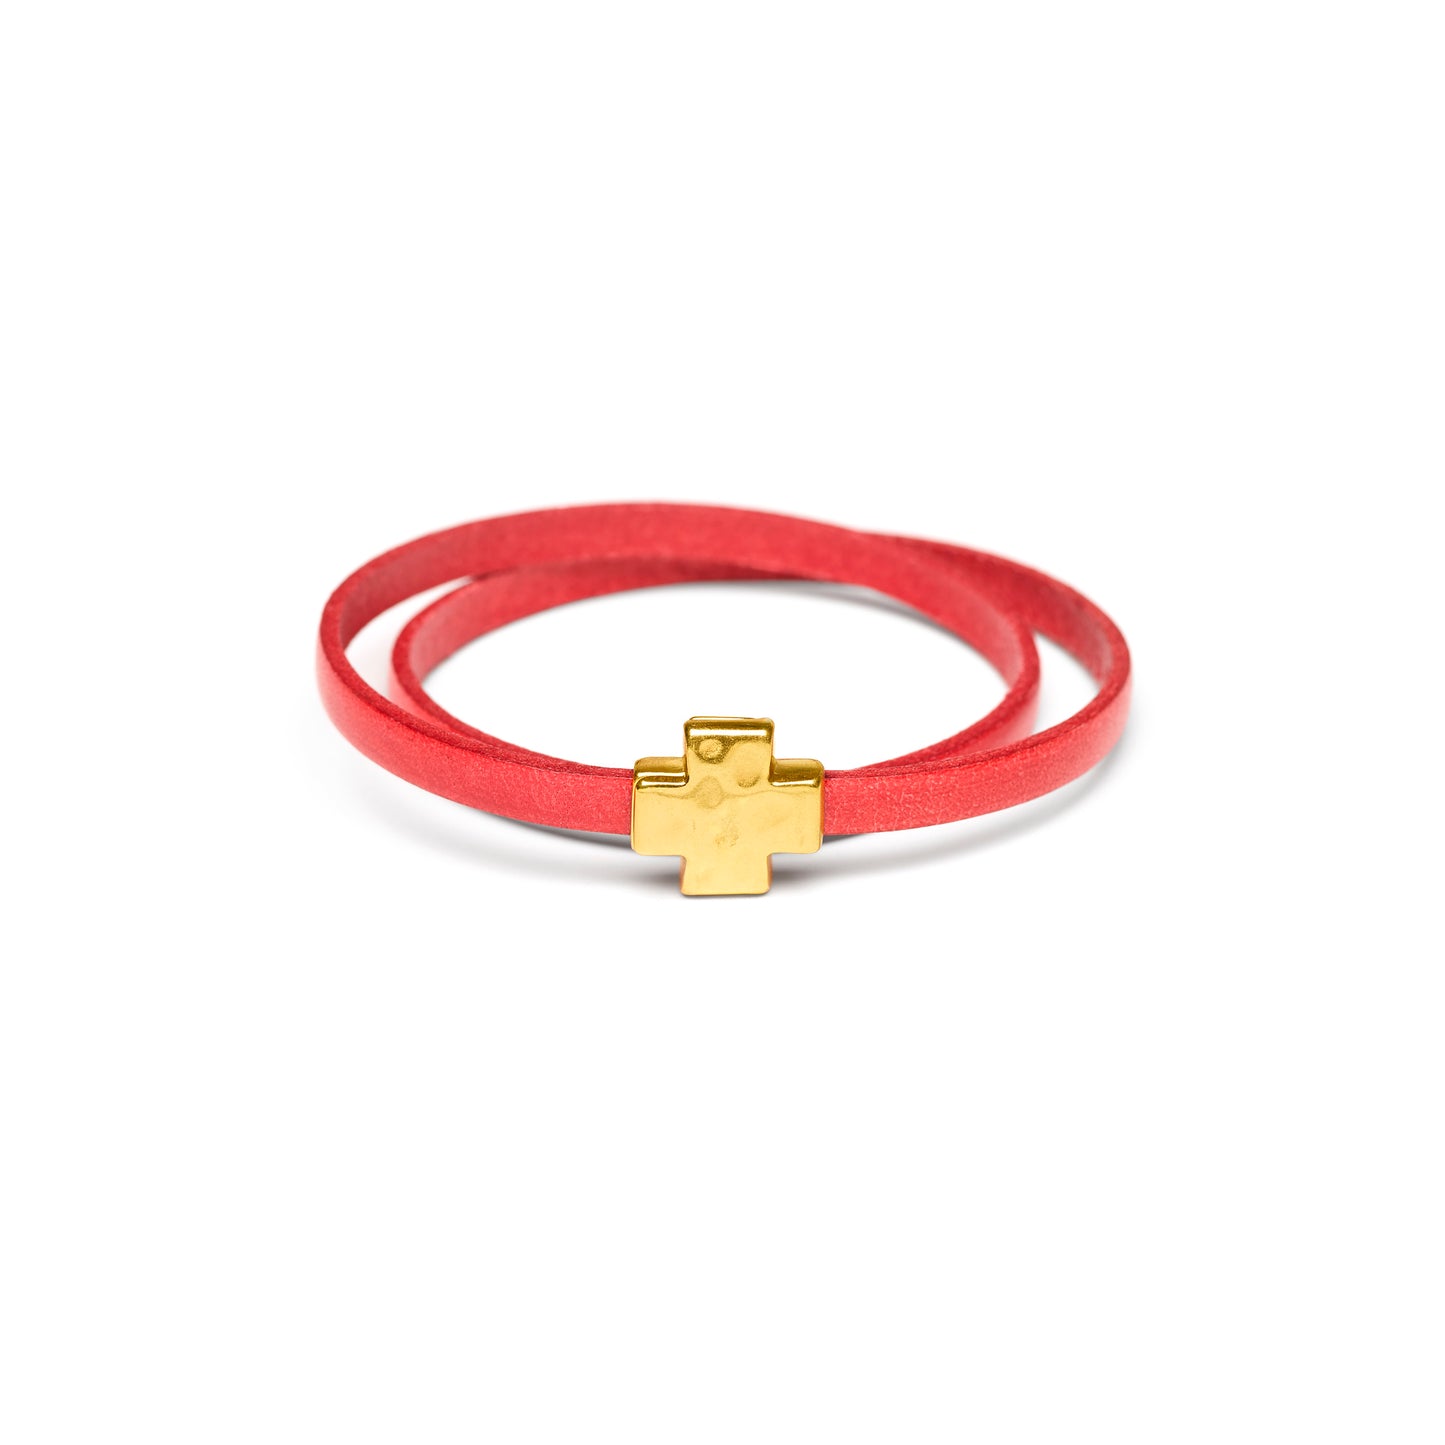 "Wrap it Up Bracelet" with Gold Cross - Double Length - Red